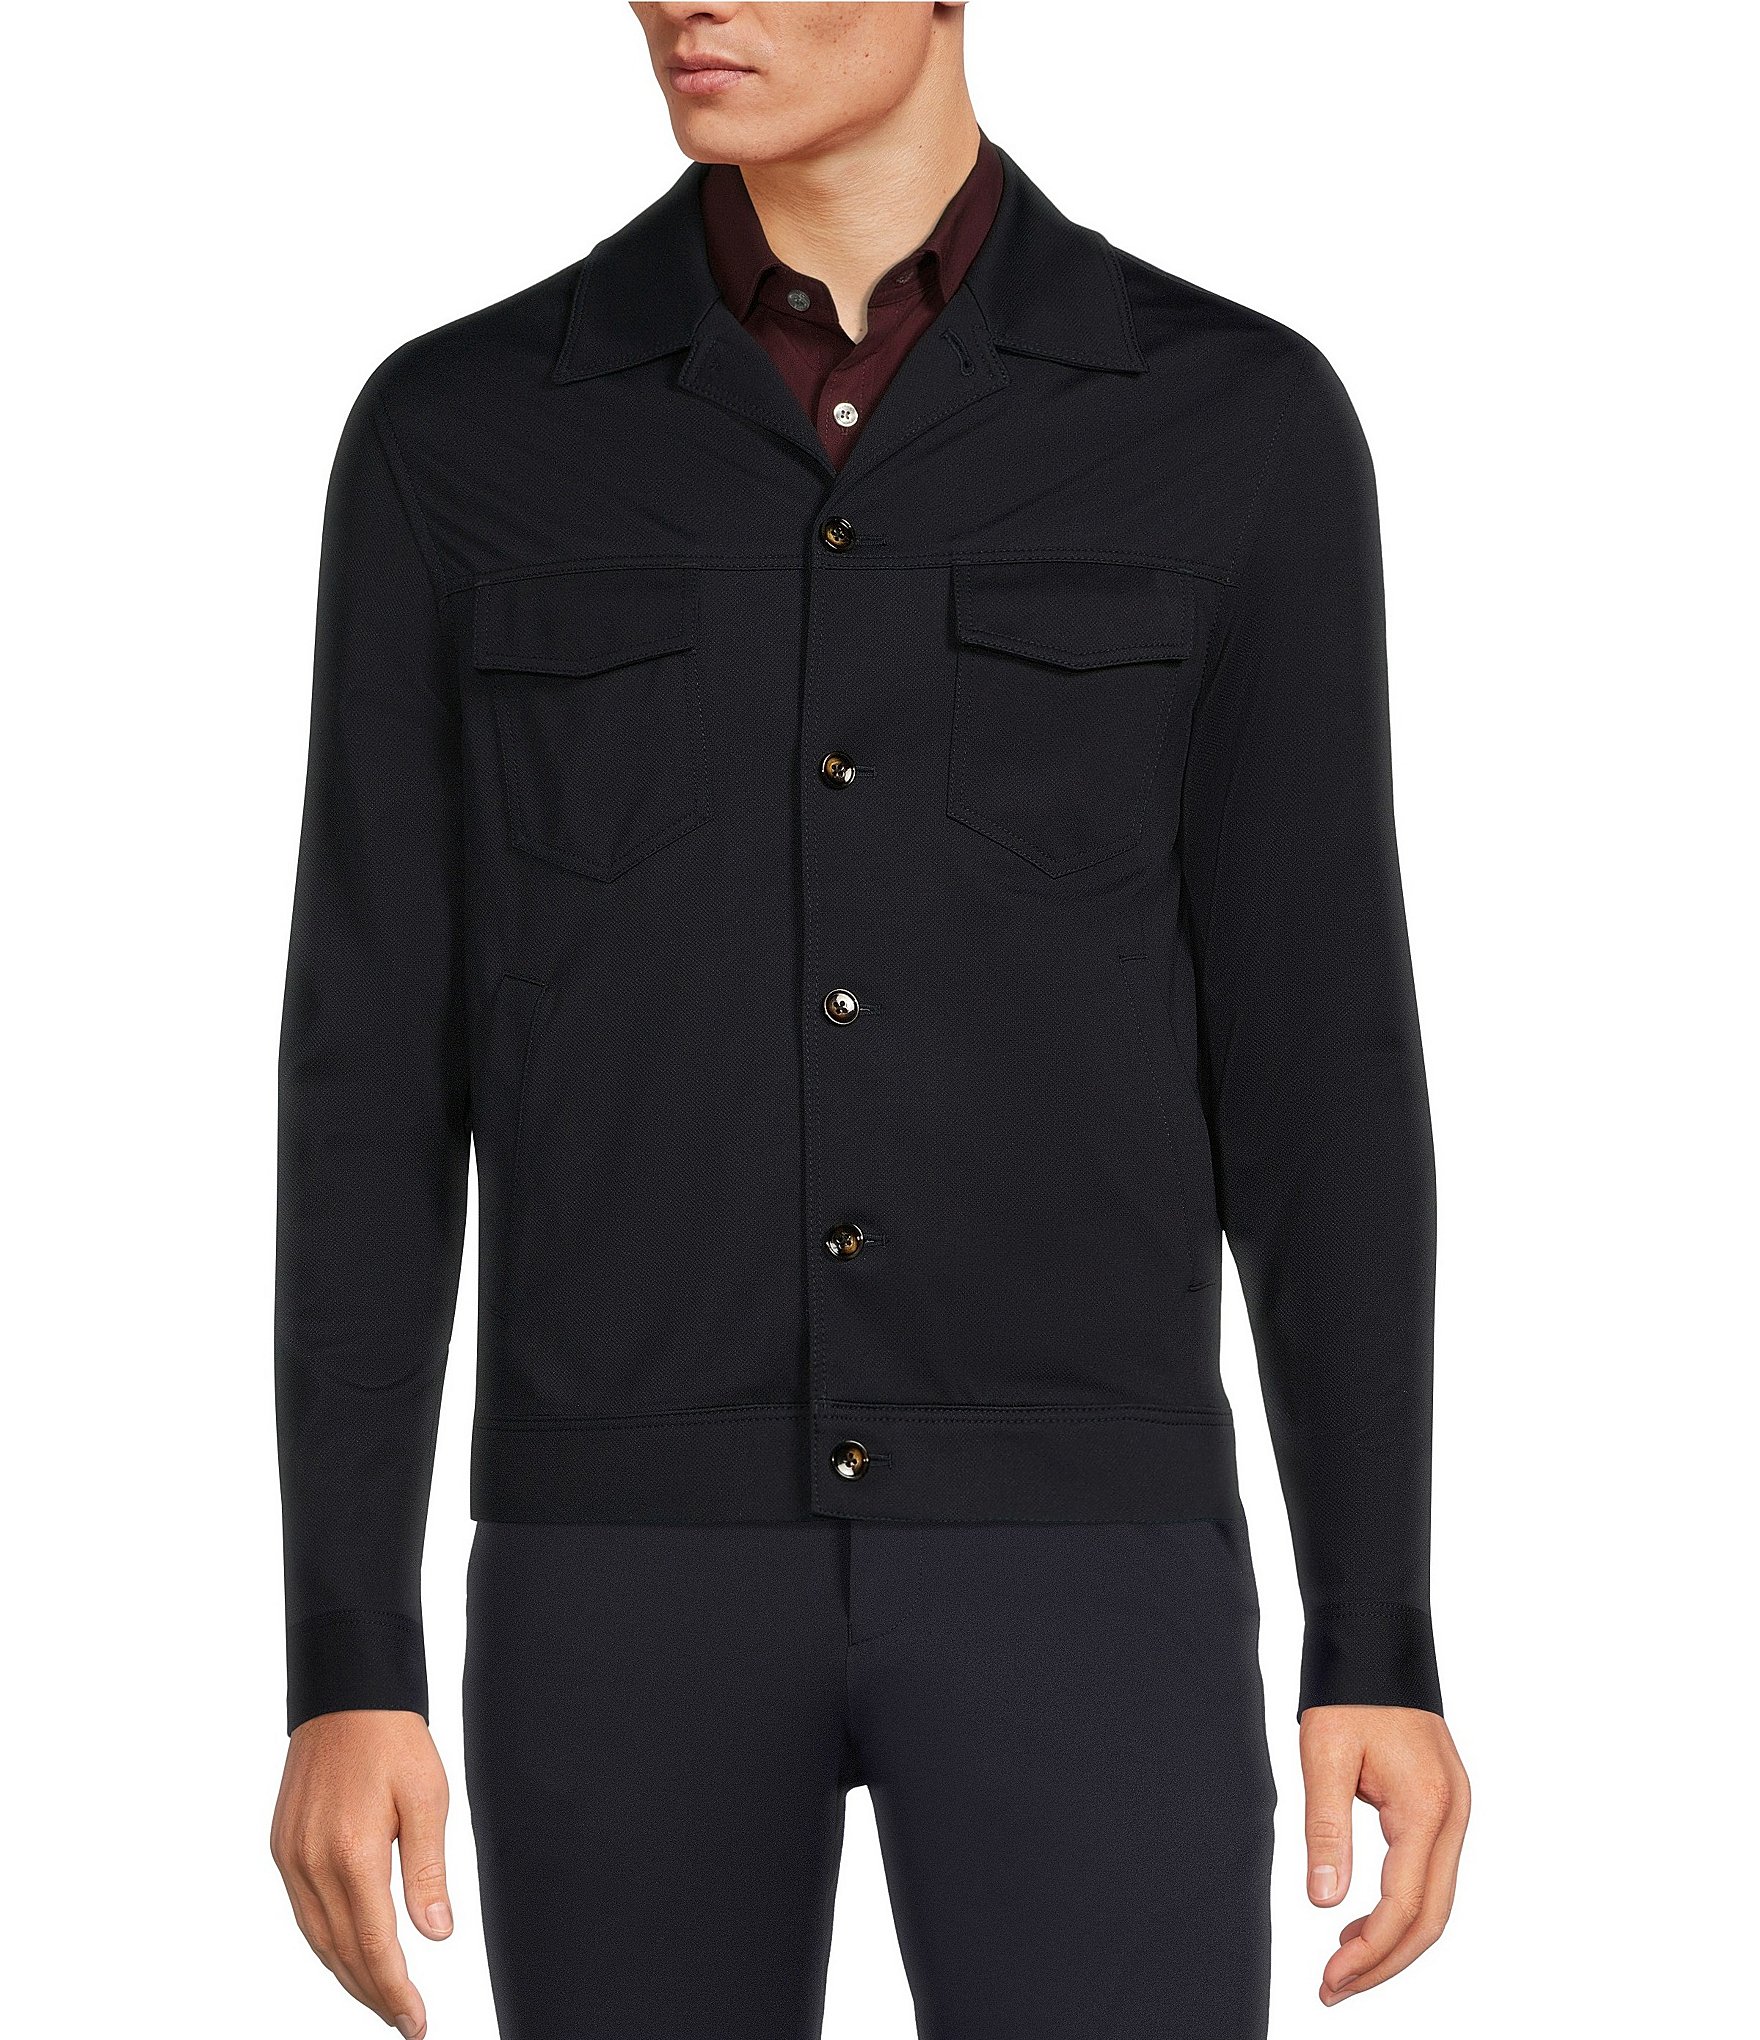 Murano Archive Collection Slim-Fit Worker Jacket | Dillard's